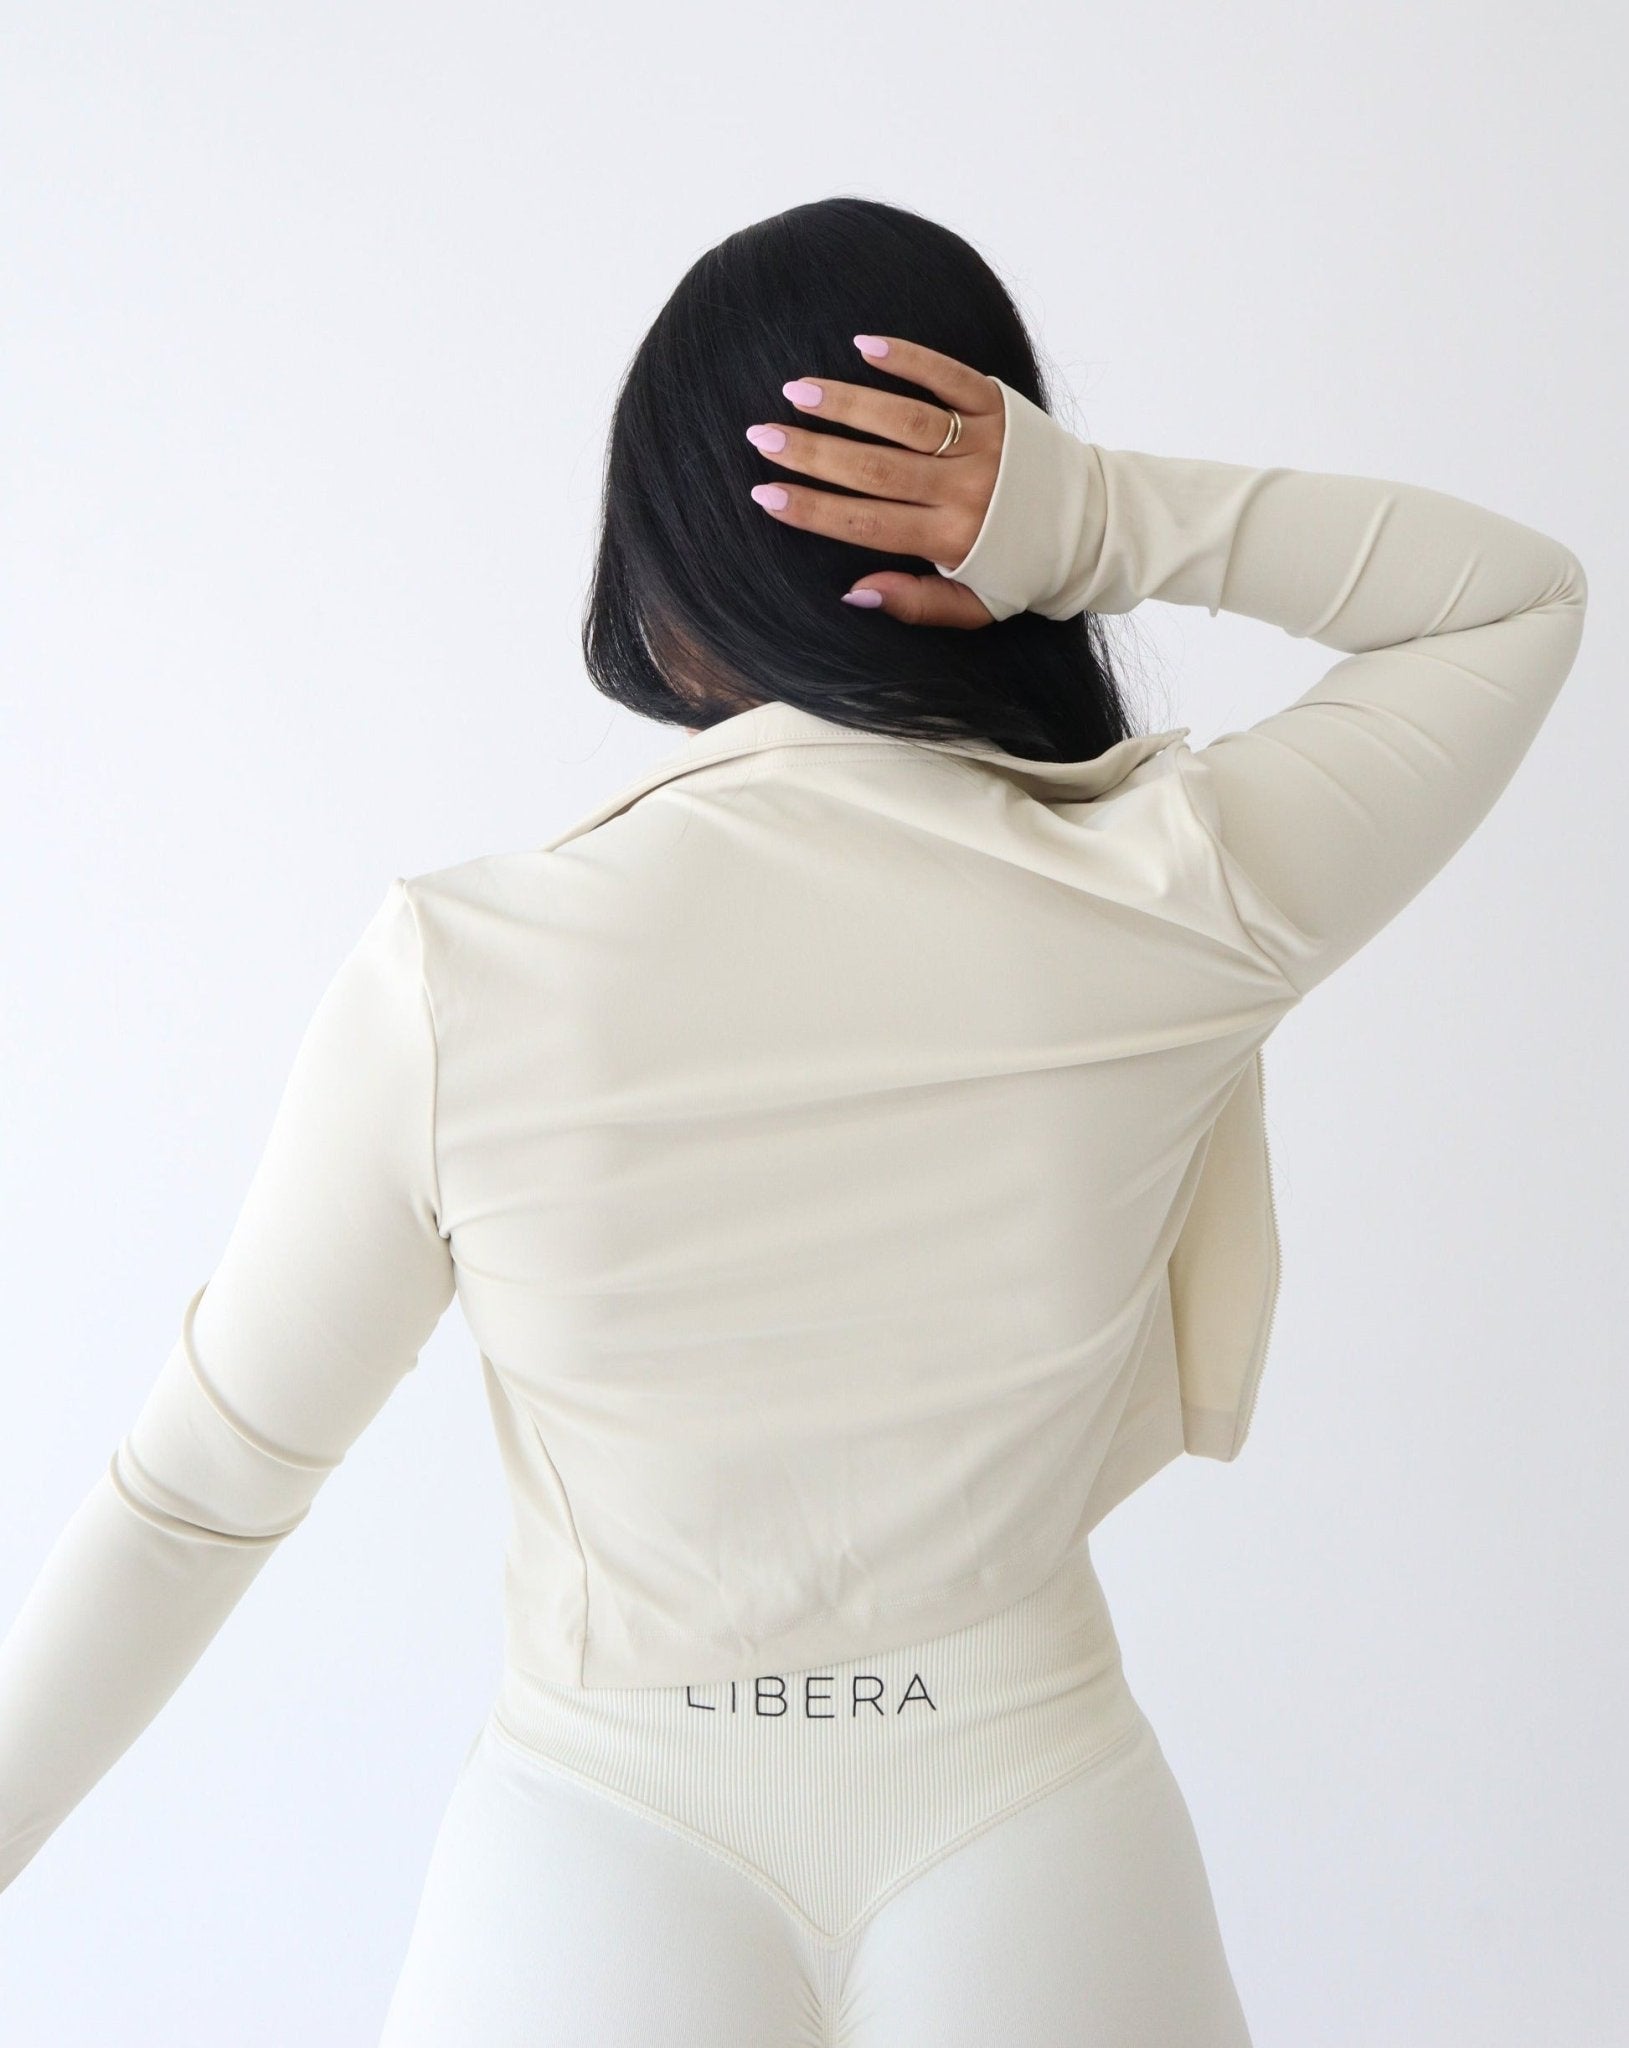 REFINE Cropped Training Jacket - CREAM - LIBERA Fitness Apparel. Upgrade your activewear with our REFINE Cropped Training Jacket. Stay dry during workouts with moisture-wicking fabric.